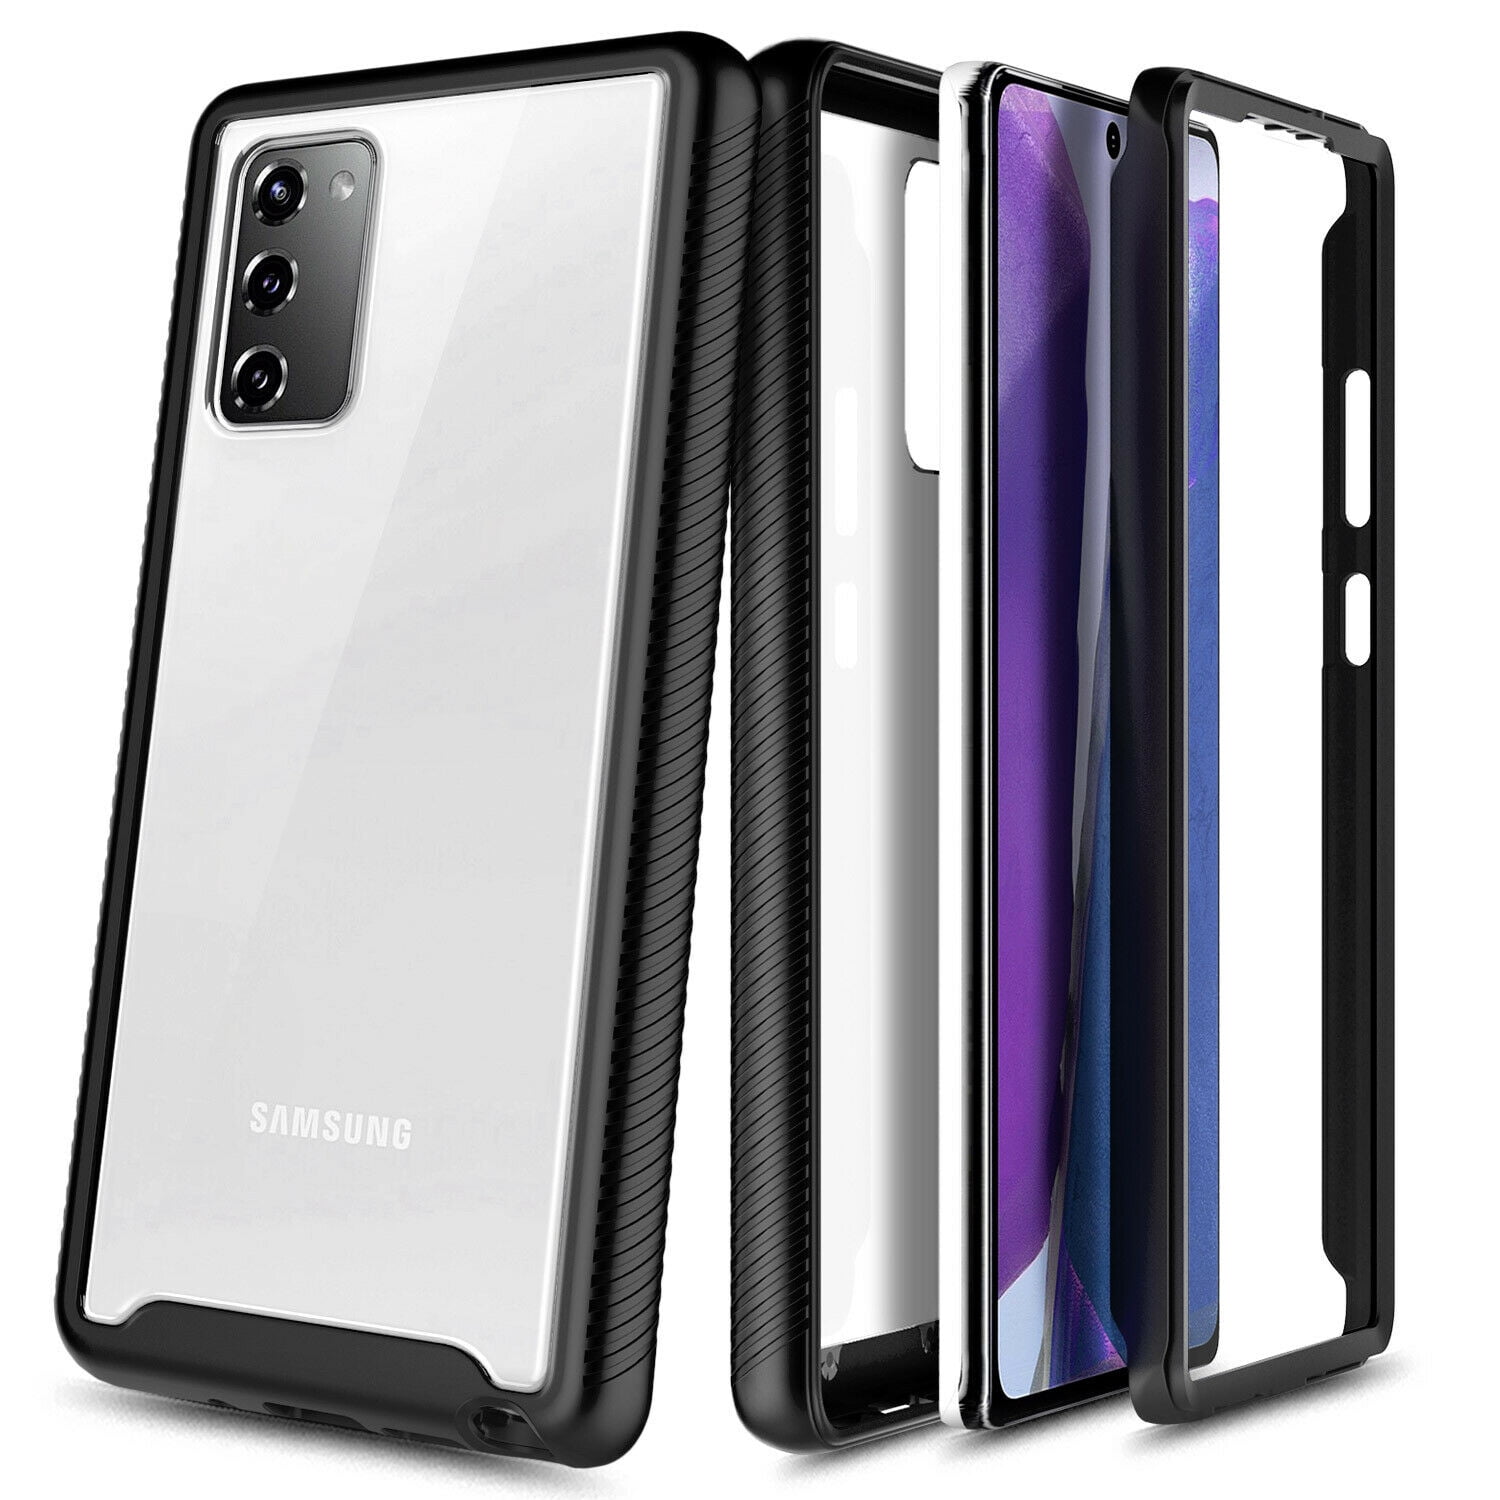 For Samsung Galaxy S20 FE 5G Case, with Built-in Screen Protector, Nagebee  Full-Body Protective Rugged Bumper Cover, Shockproof Durable Case (Fantasy)